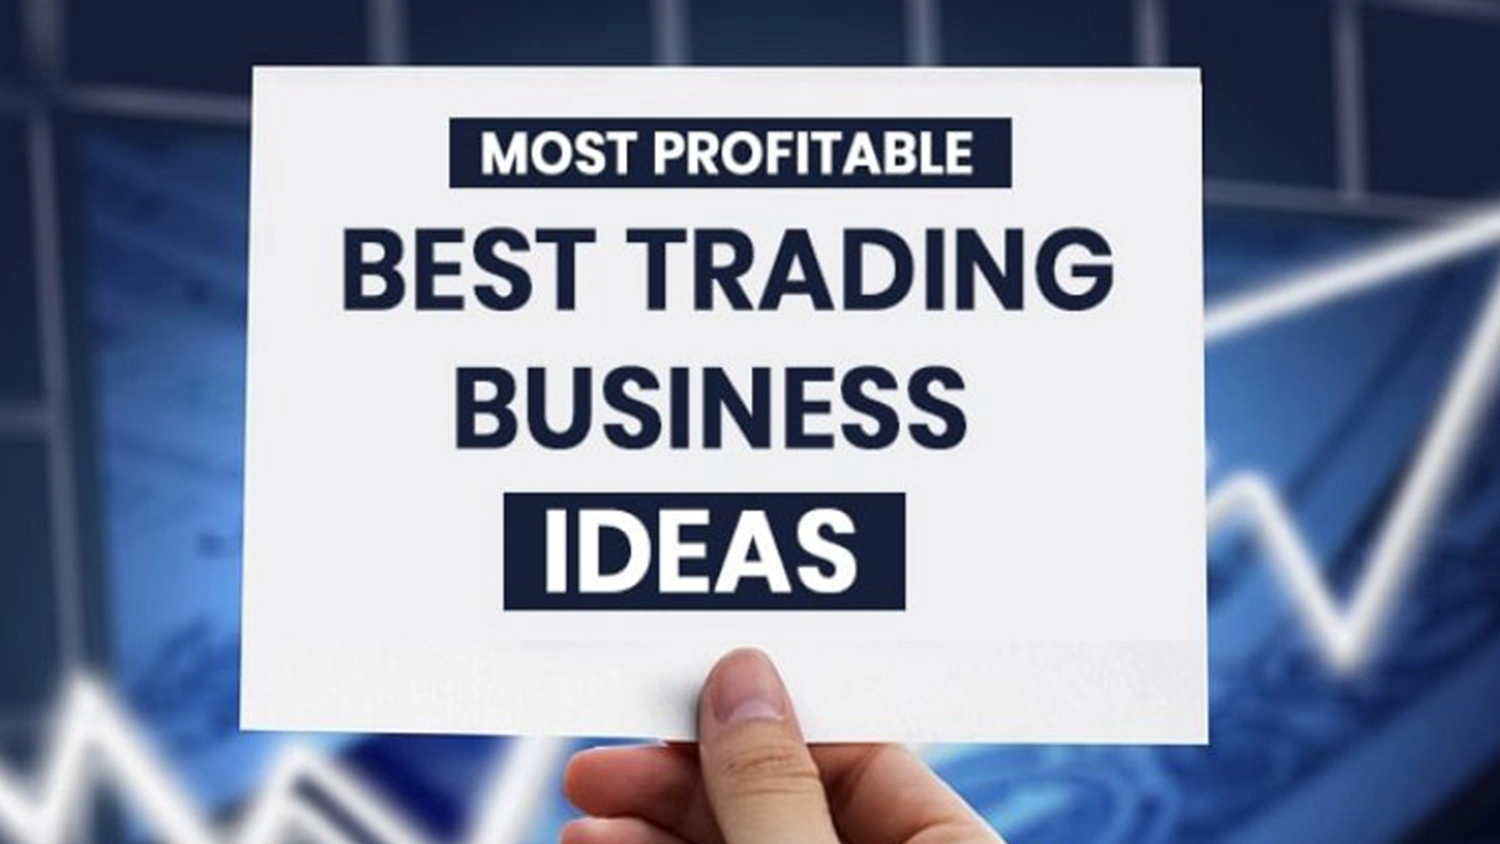 5 Best Trading Business Ideas In India With Low Investment